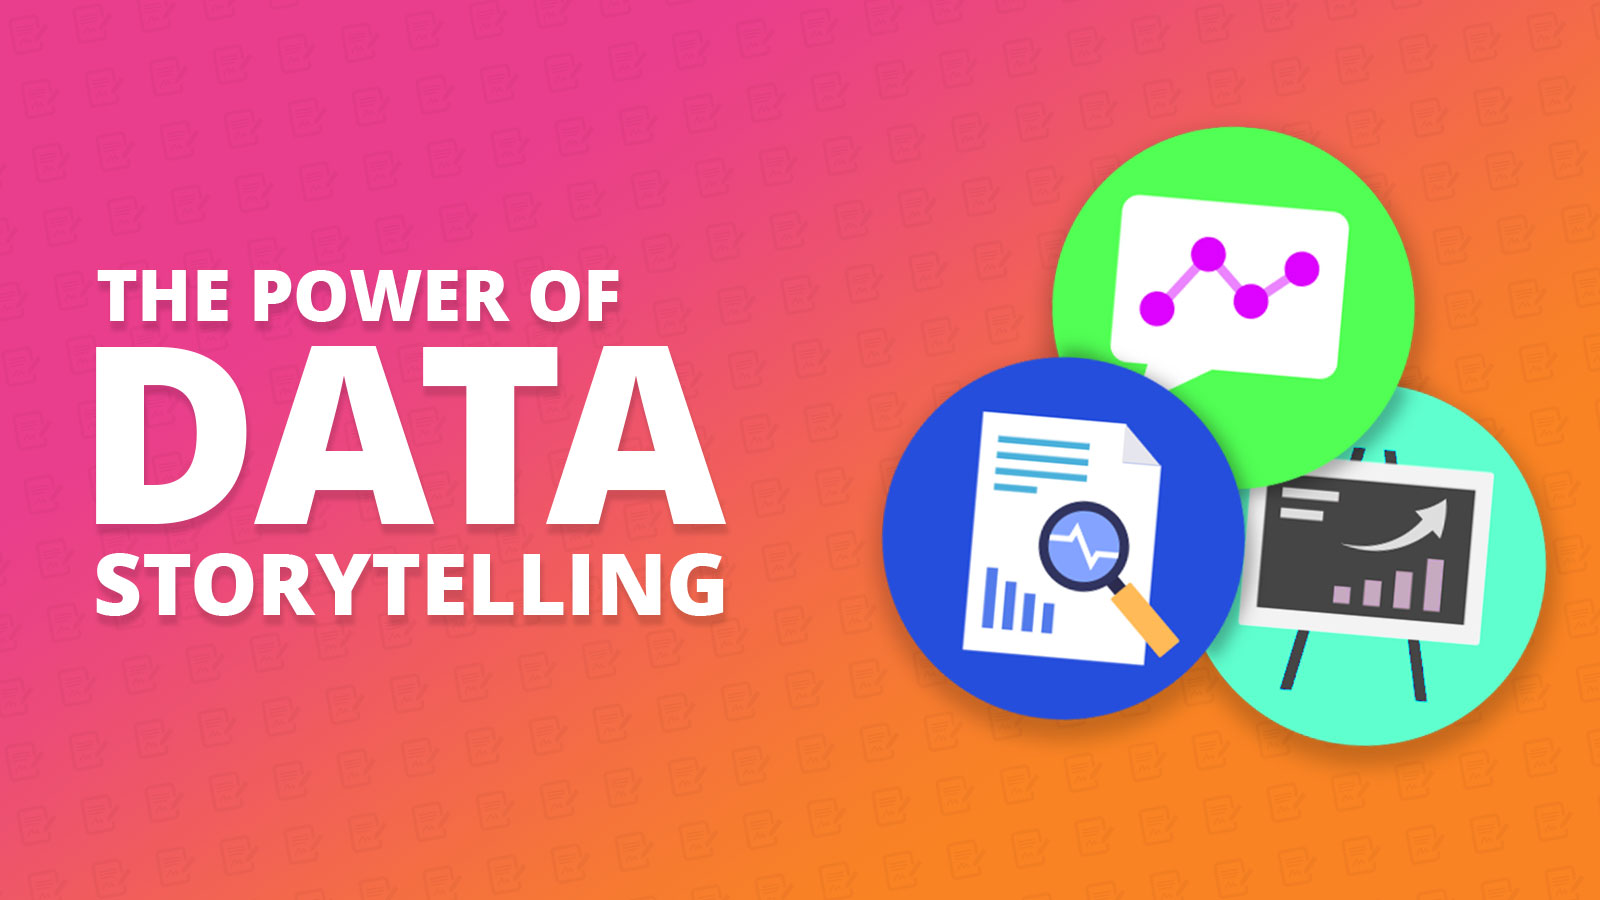 The power of data story telling